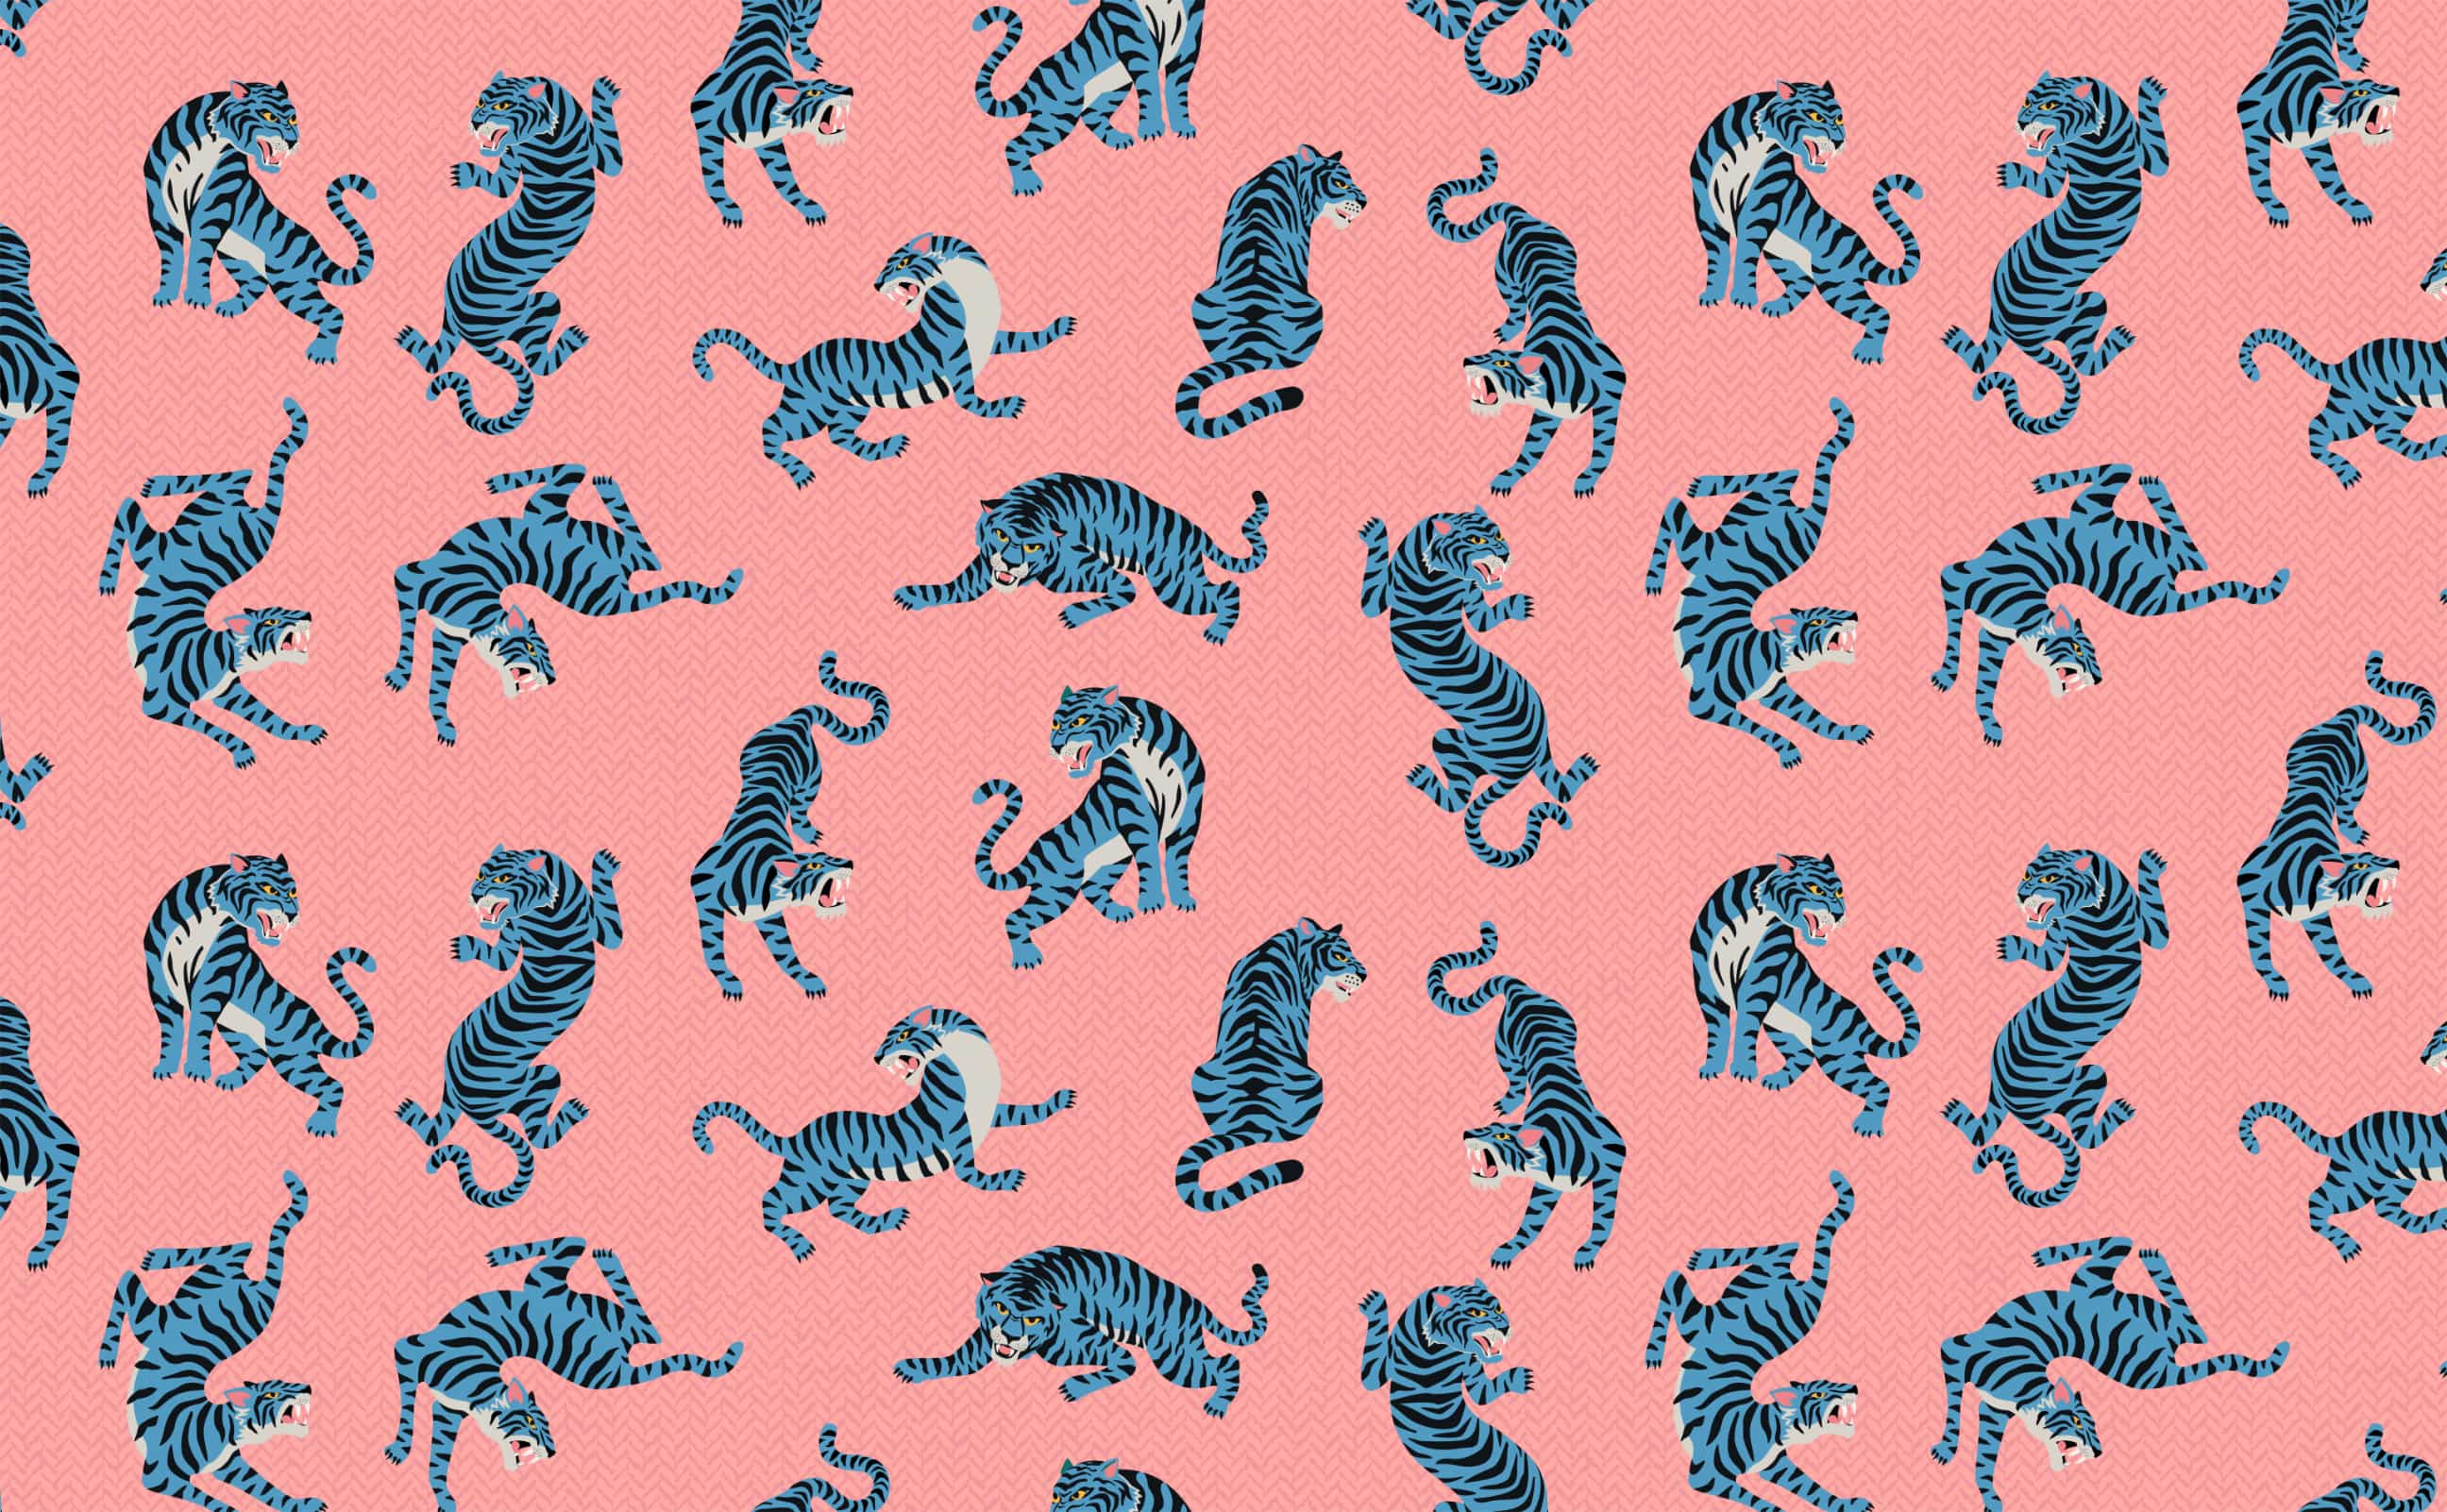 A pink background with blue tigers on it - Coral, tiger